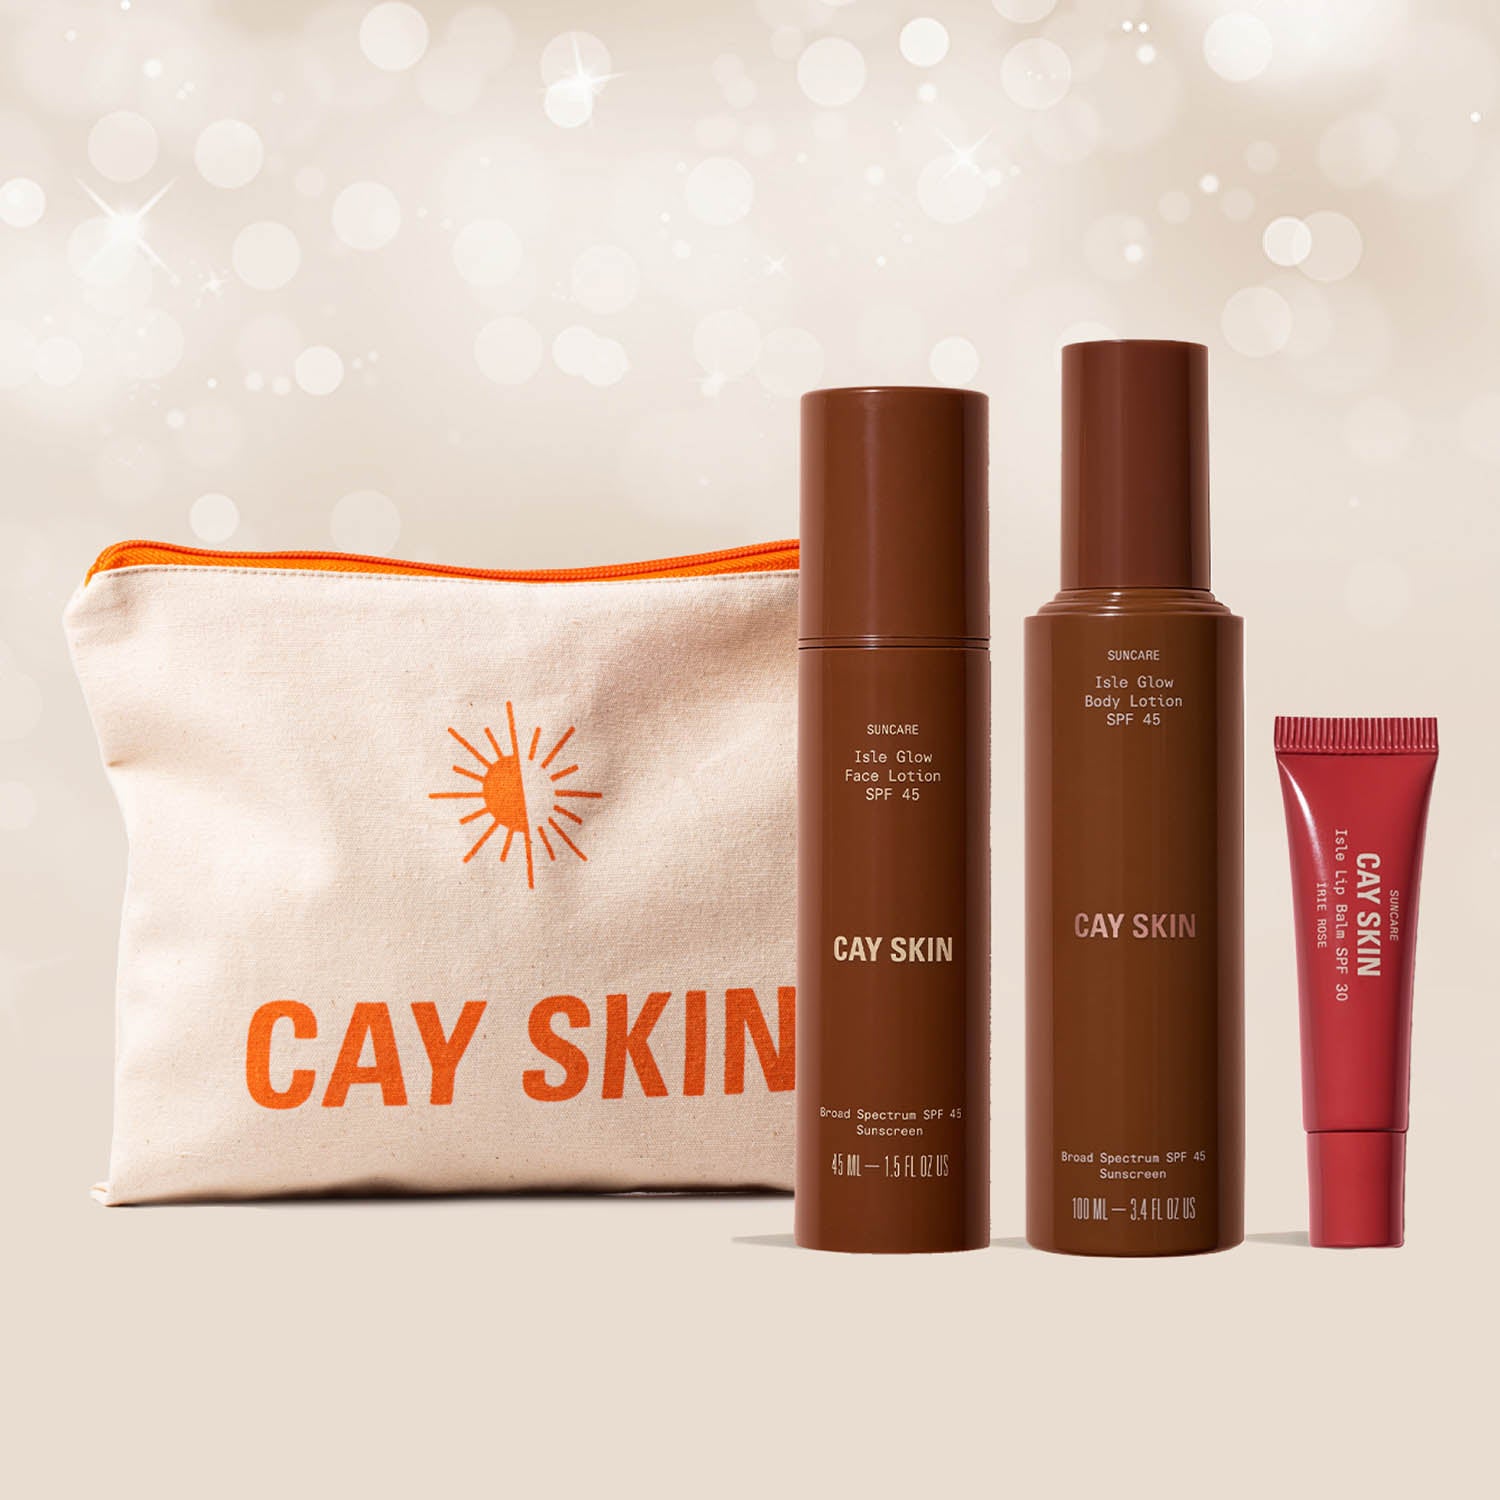 Cay Skin Isle Glow Face Lotion, Body Lotion and Lip Balm Combo